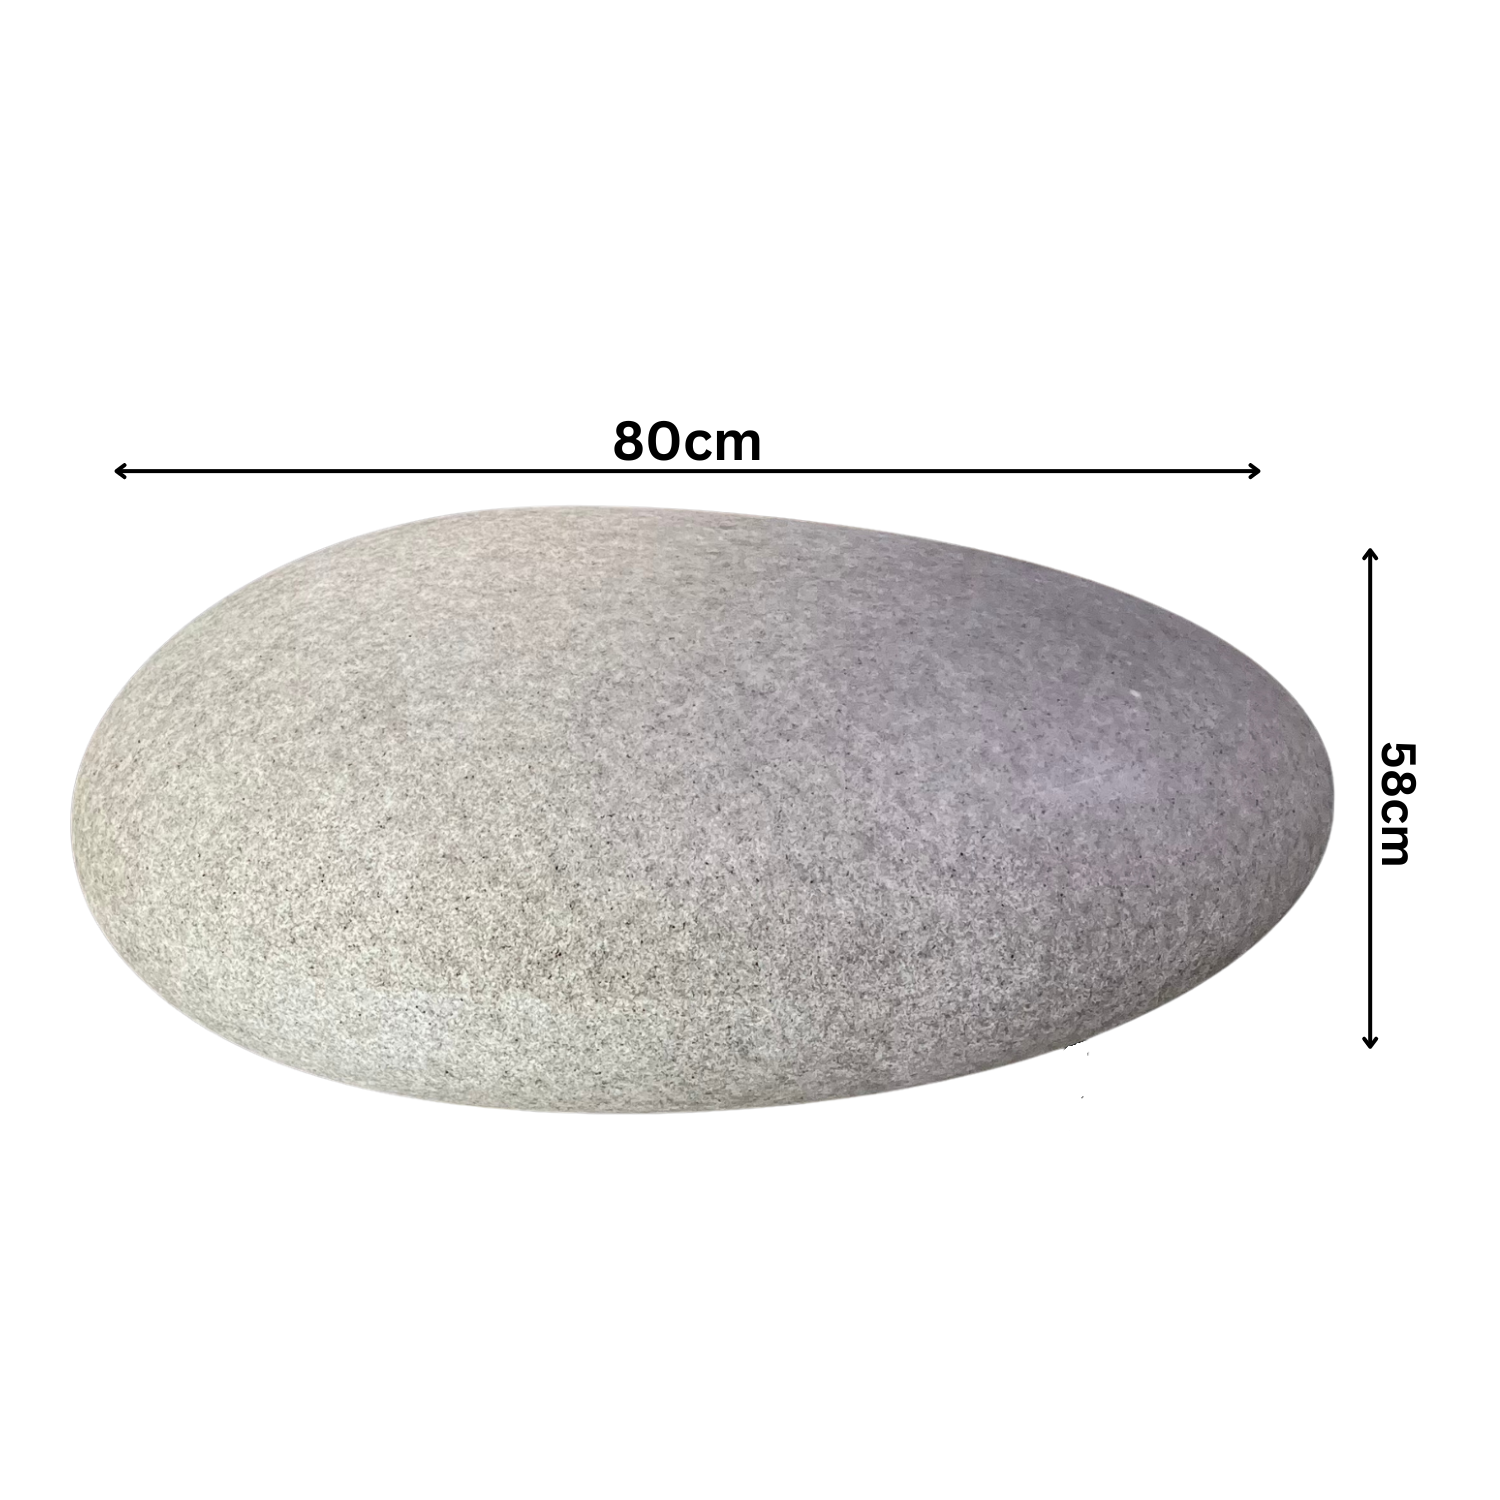 Hug A Plant |LED Pebble With Inner For Home & Garden Decor (Big, White Stone Finish, Pack Of 1)